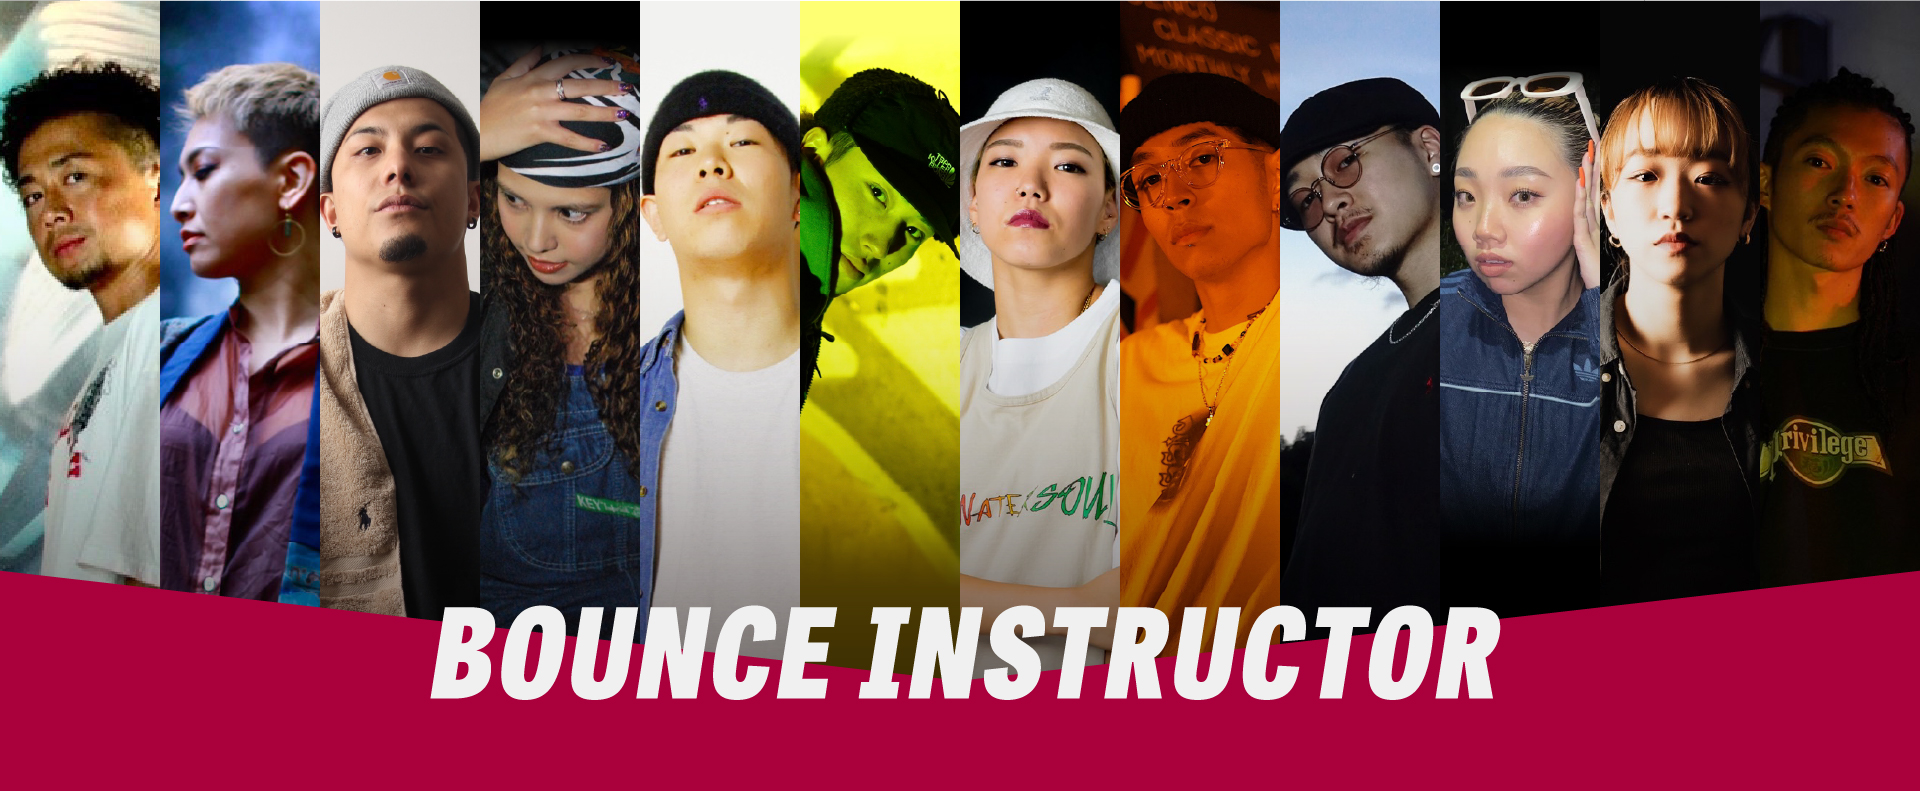 BOUNCE INSTRUCTOR